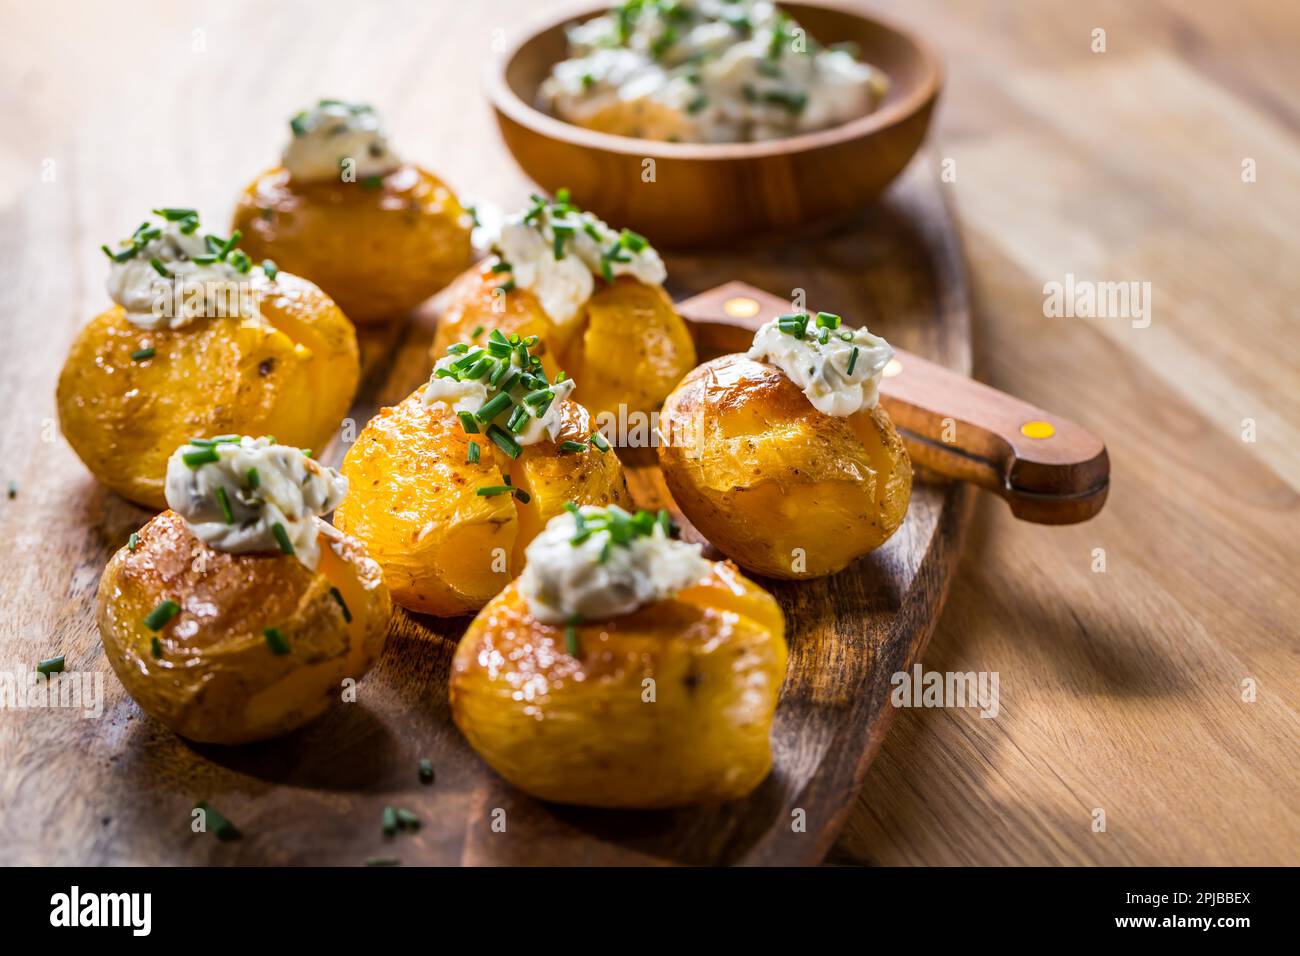 Small oven baked potatoes with sour cream with butter and chives Stock Photo